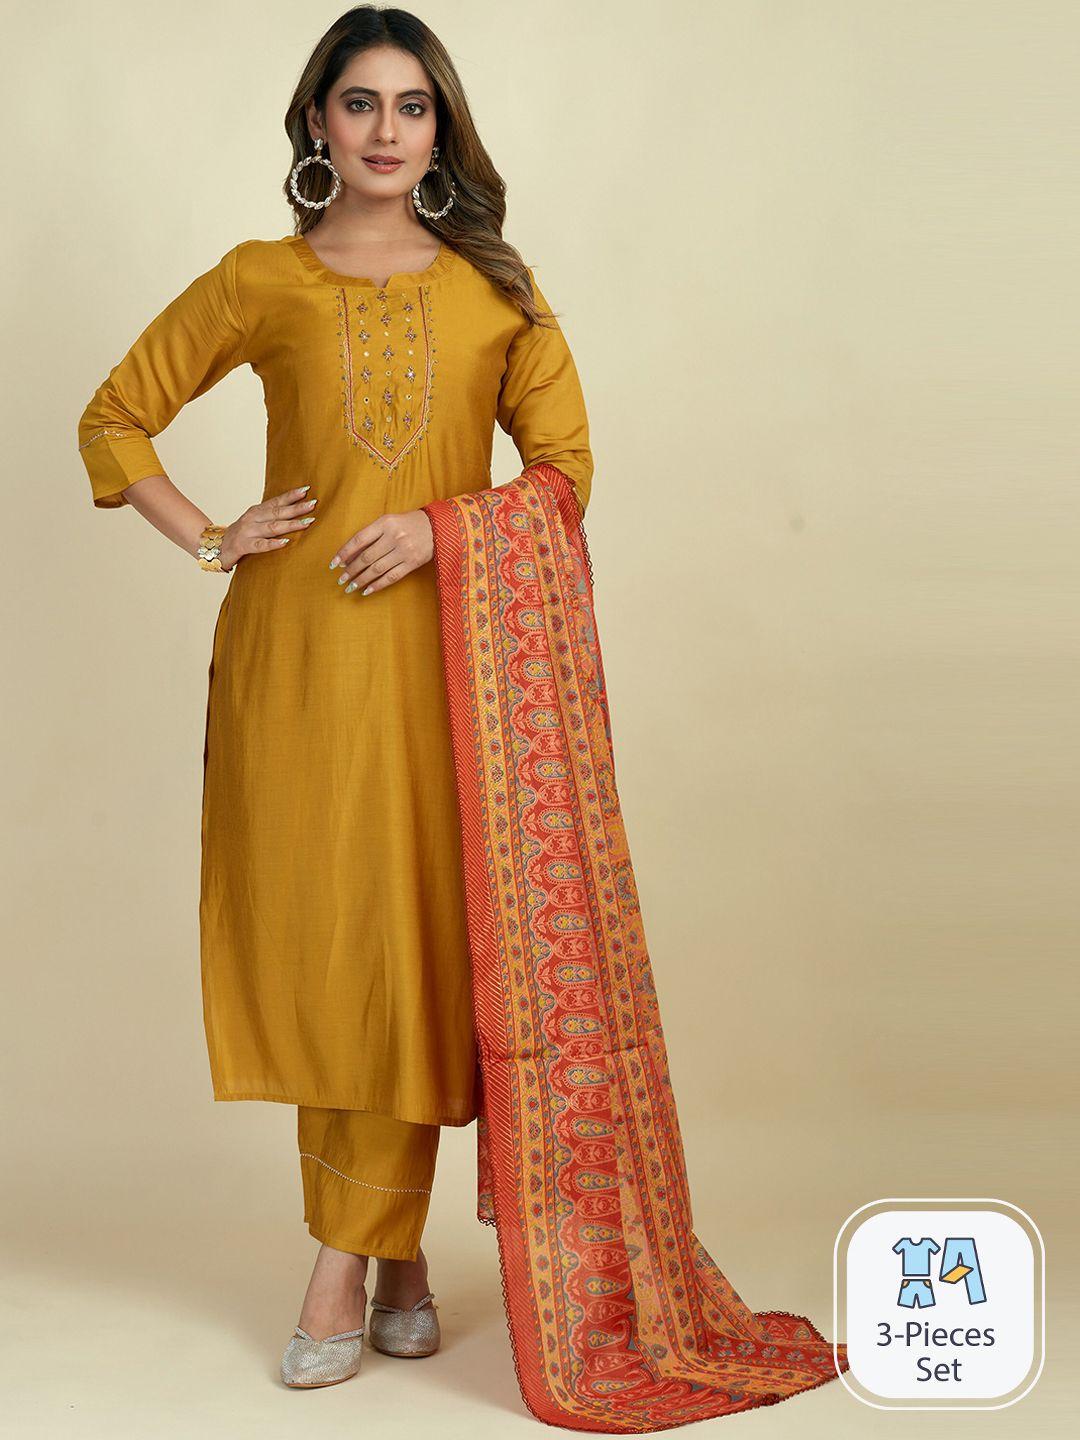 mingora floral embroidered beads and stones kurta & trousers with dupatta